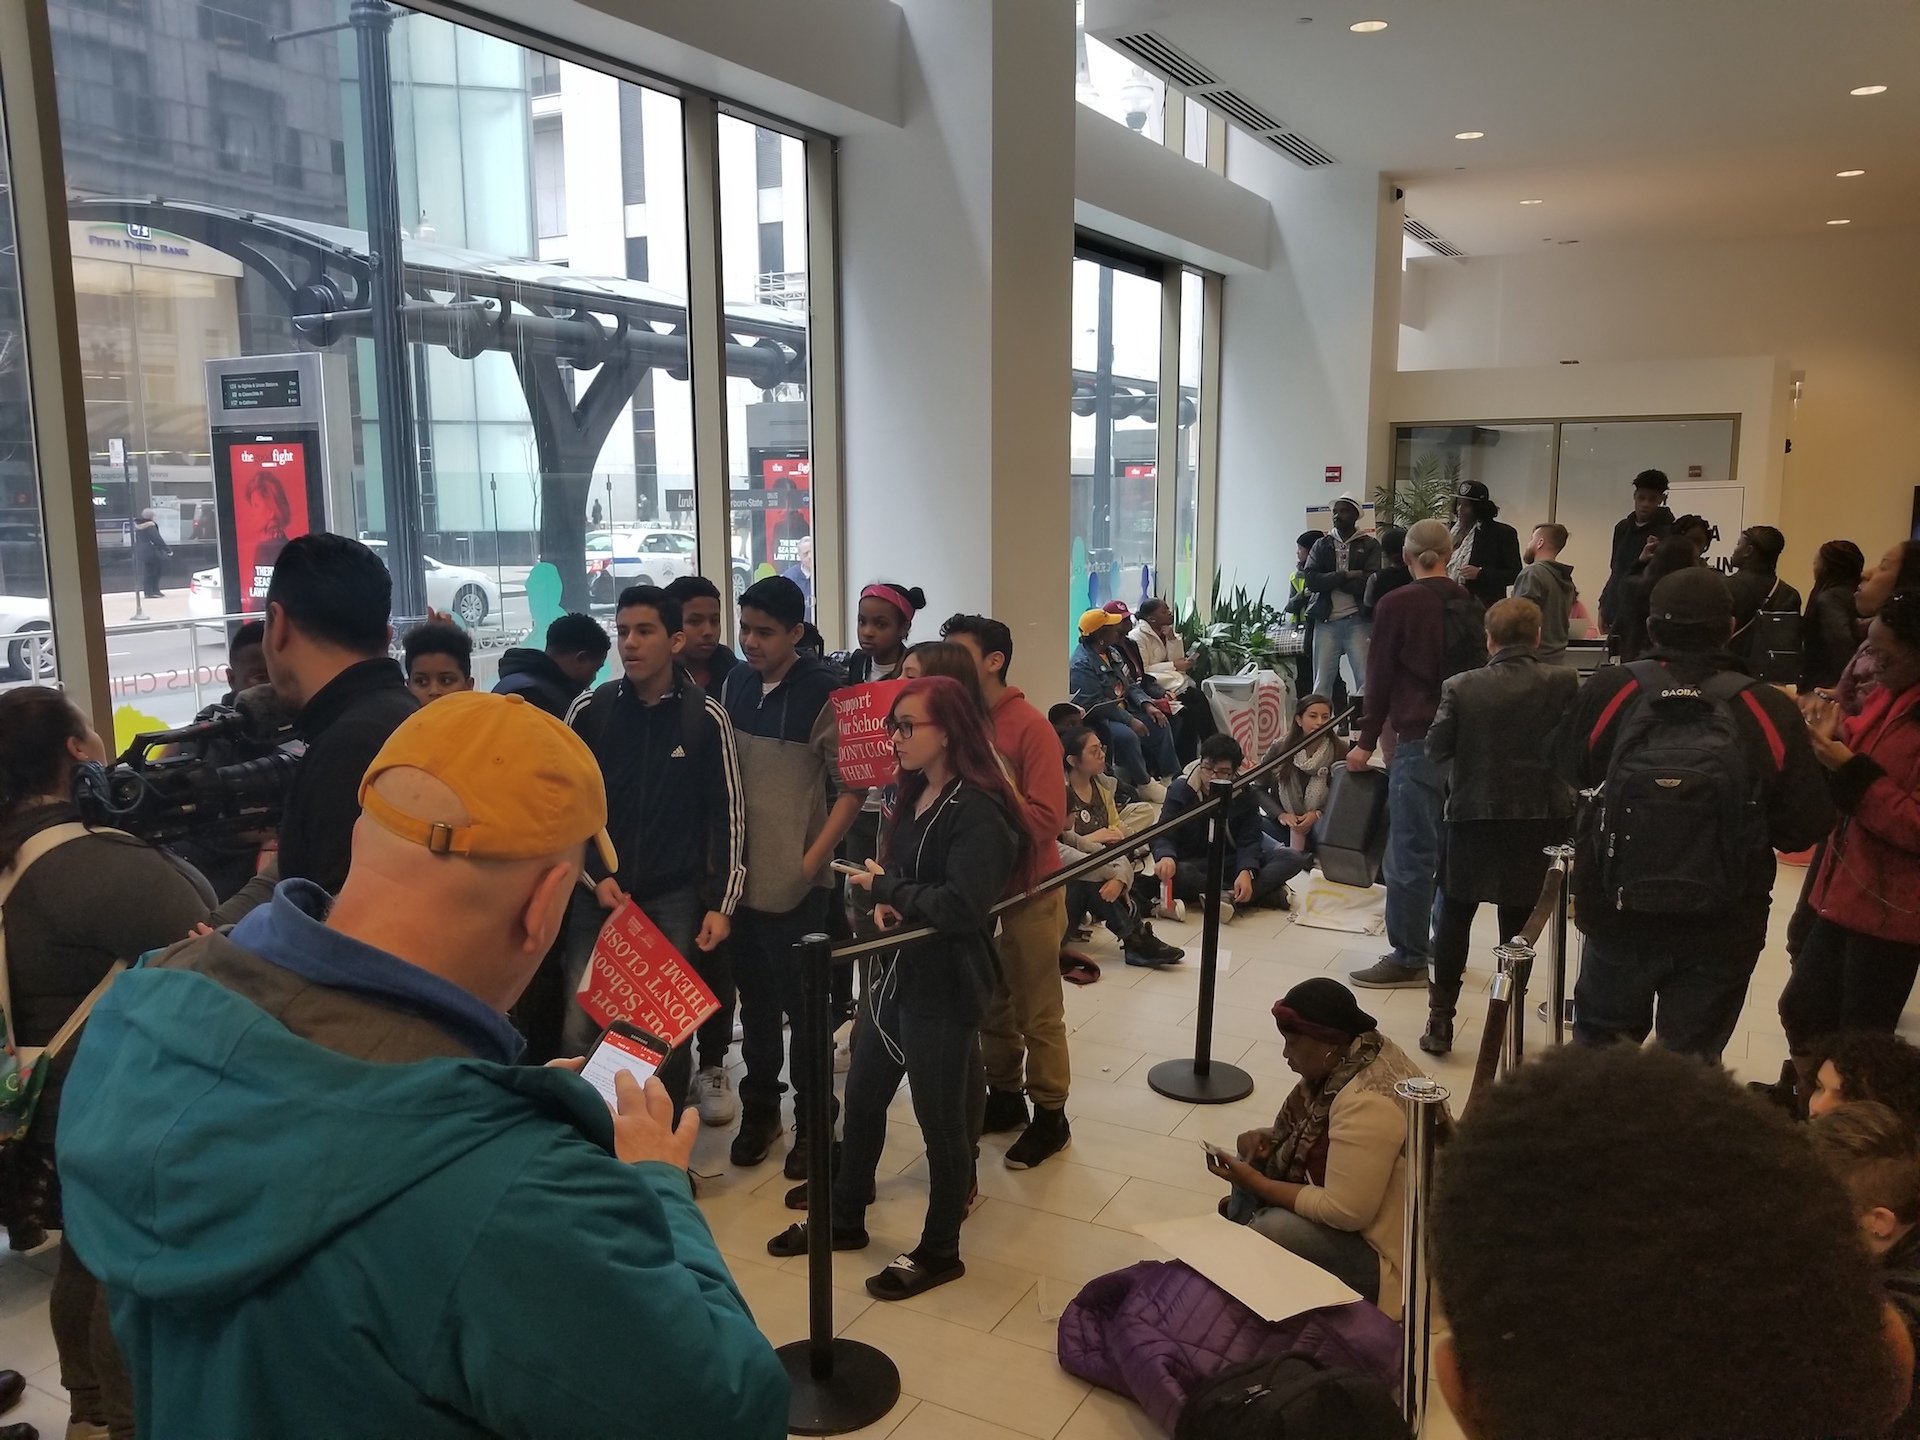 Students from the four Englewood schools packed the lobby at CPS Central Office during Wednesday's board meeting. (Matt Masterson / Chicago Tonight)